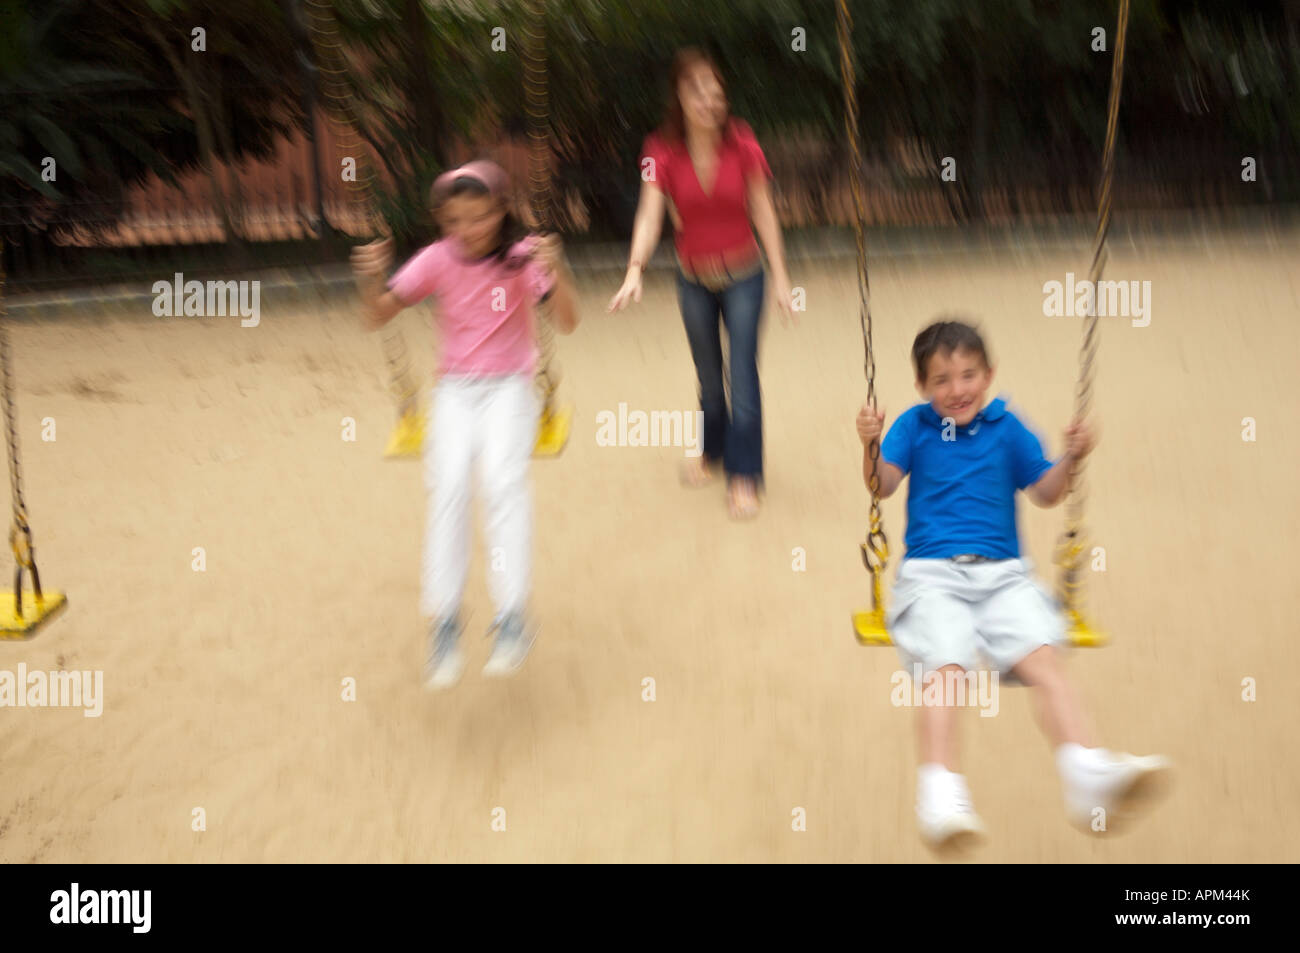 Mother and children in playground Stock Photo